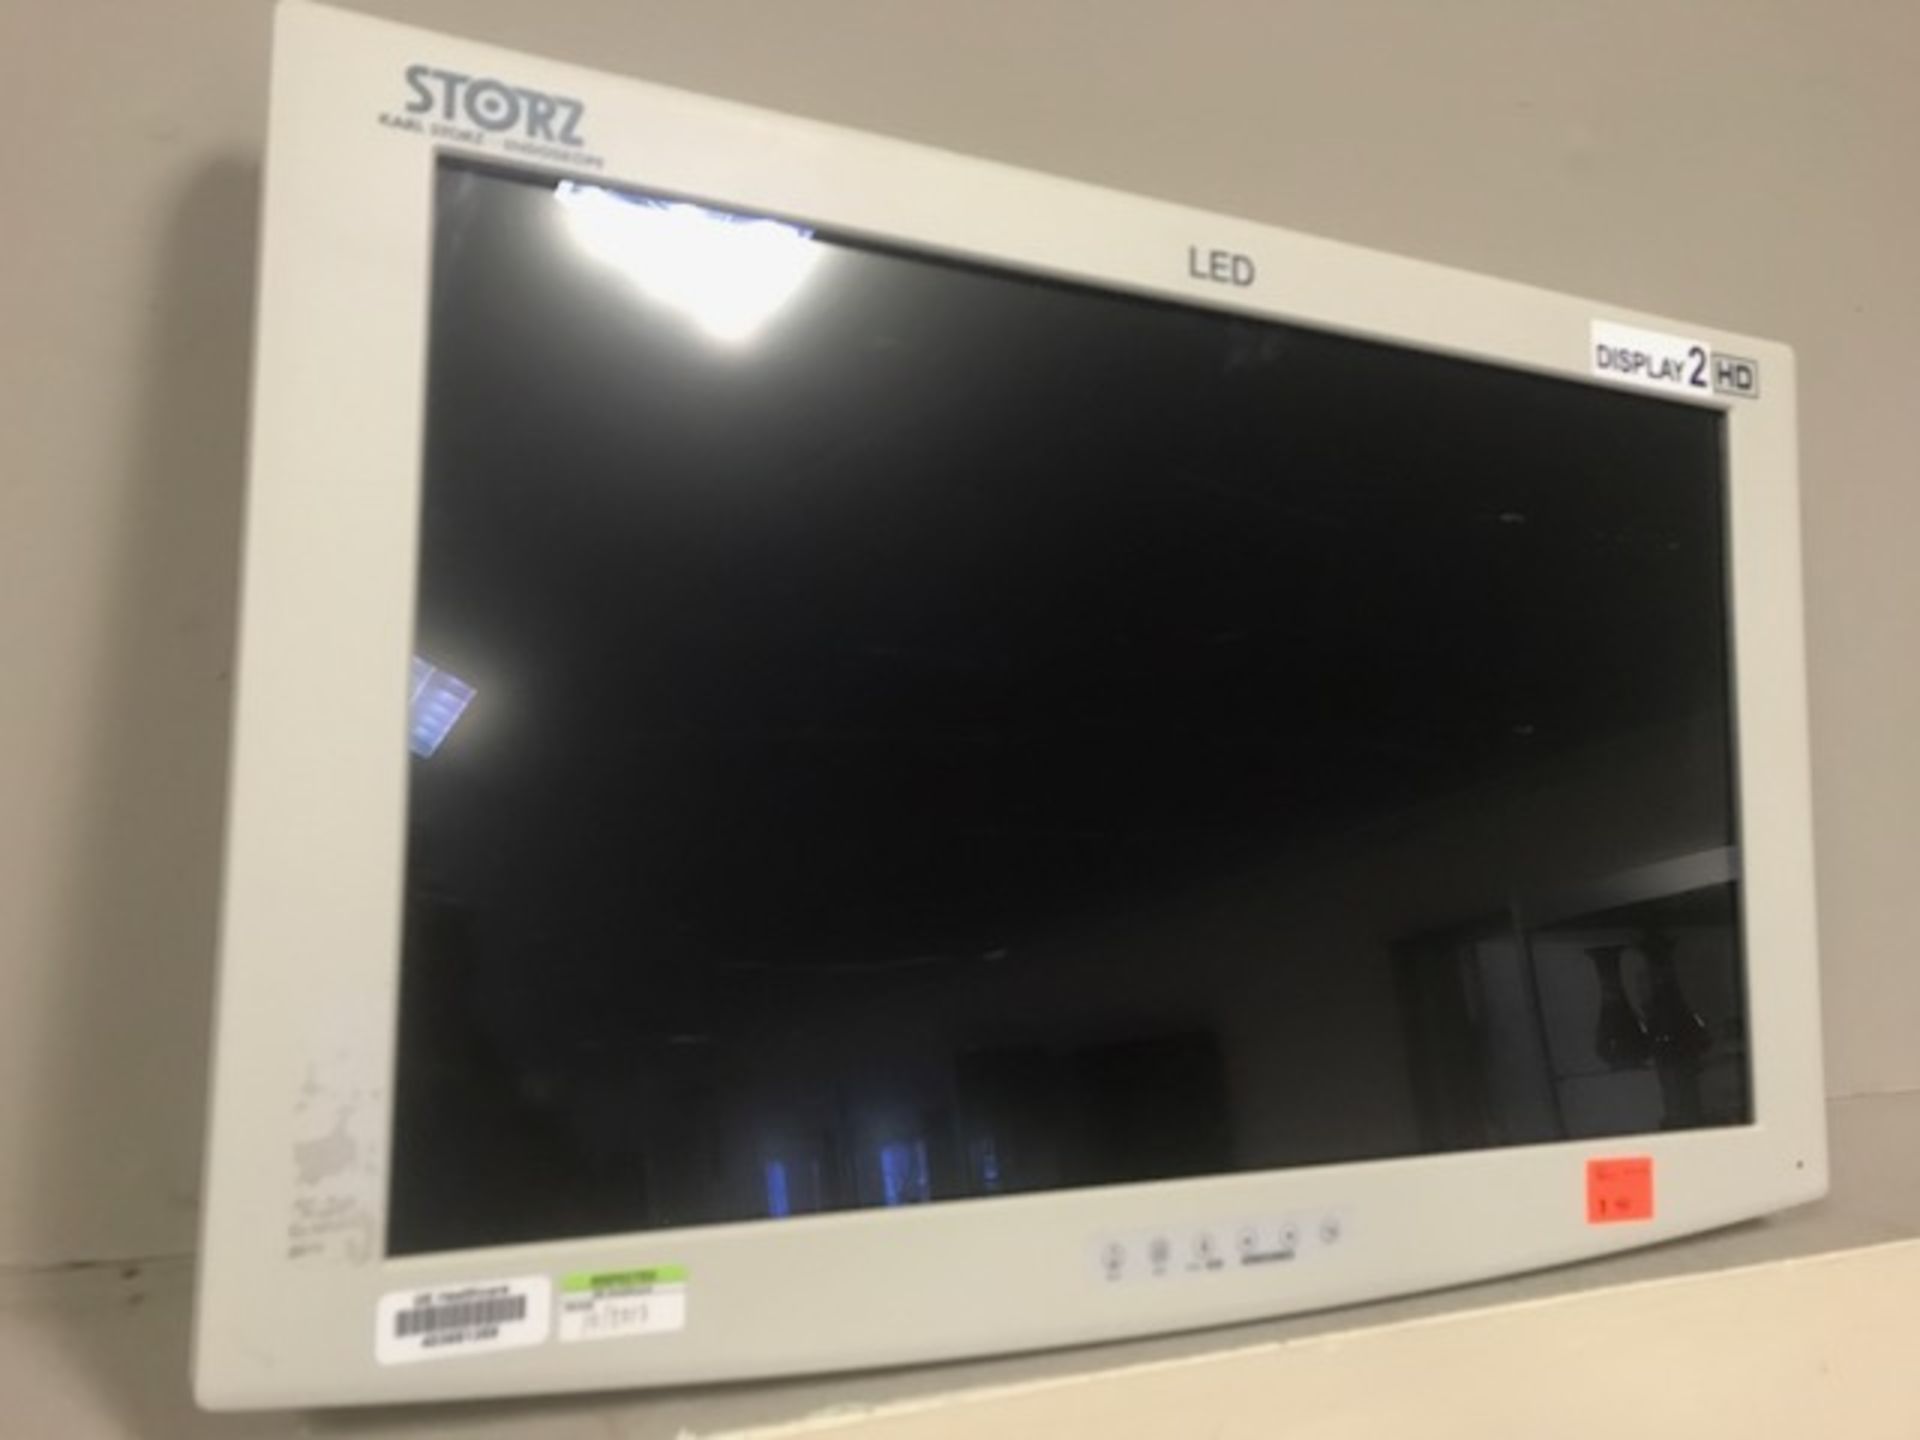 Storz Flat Screen TV, 26", LED, HD, Wall Hung, By NDS Surgical Imaging, Model: SC-WU26-A1511, Part #